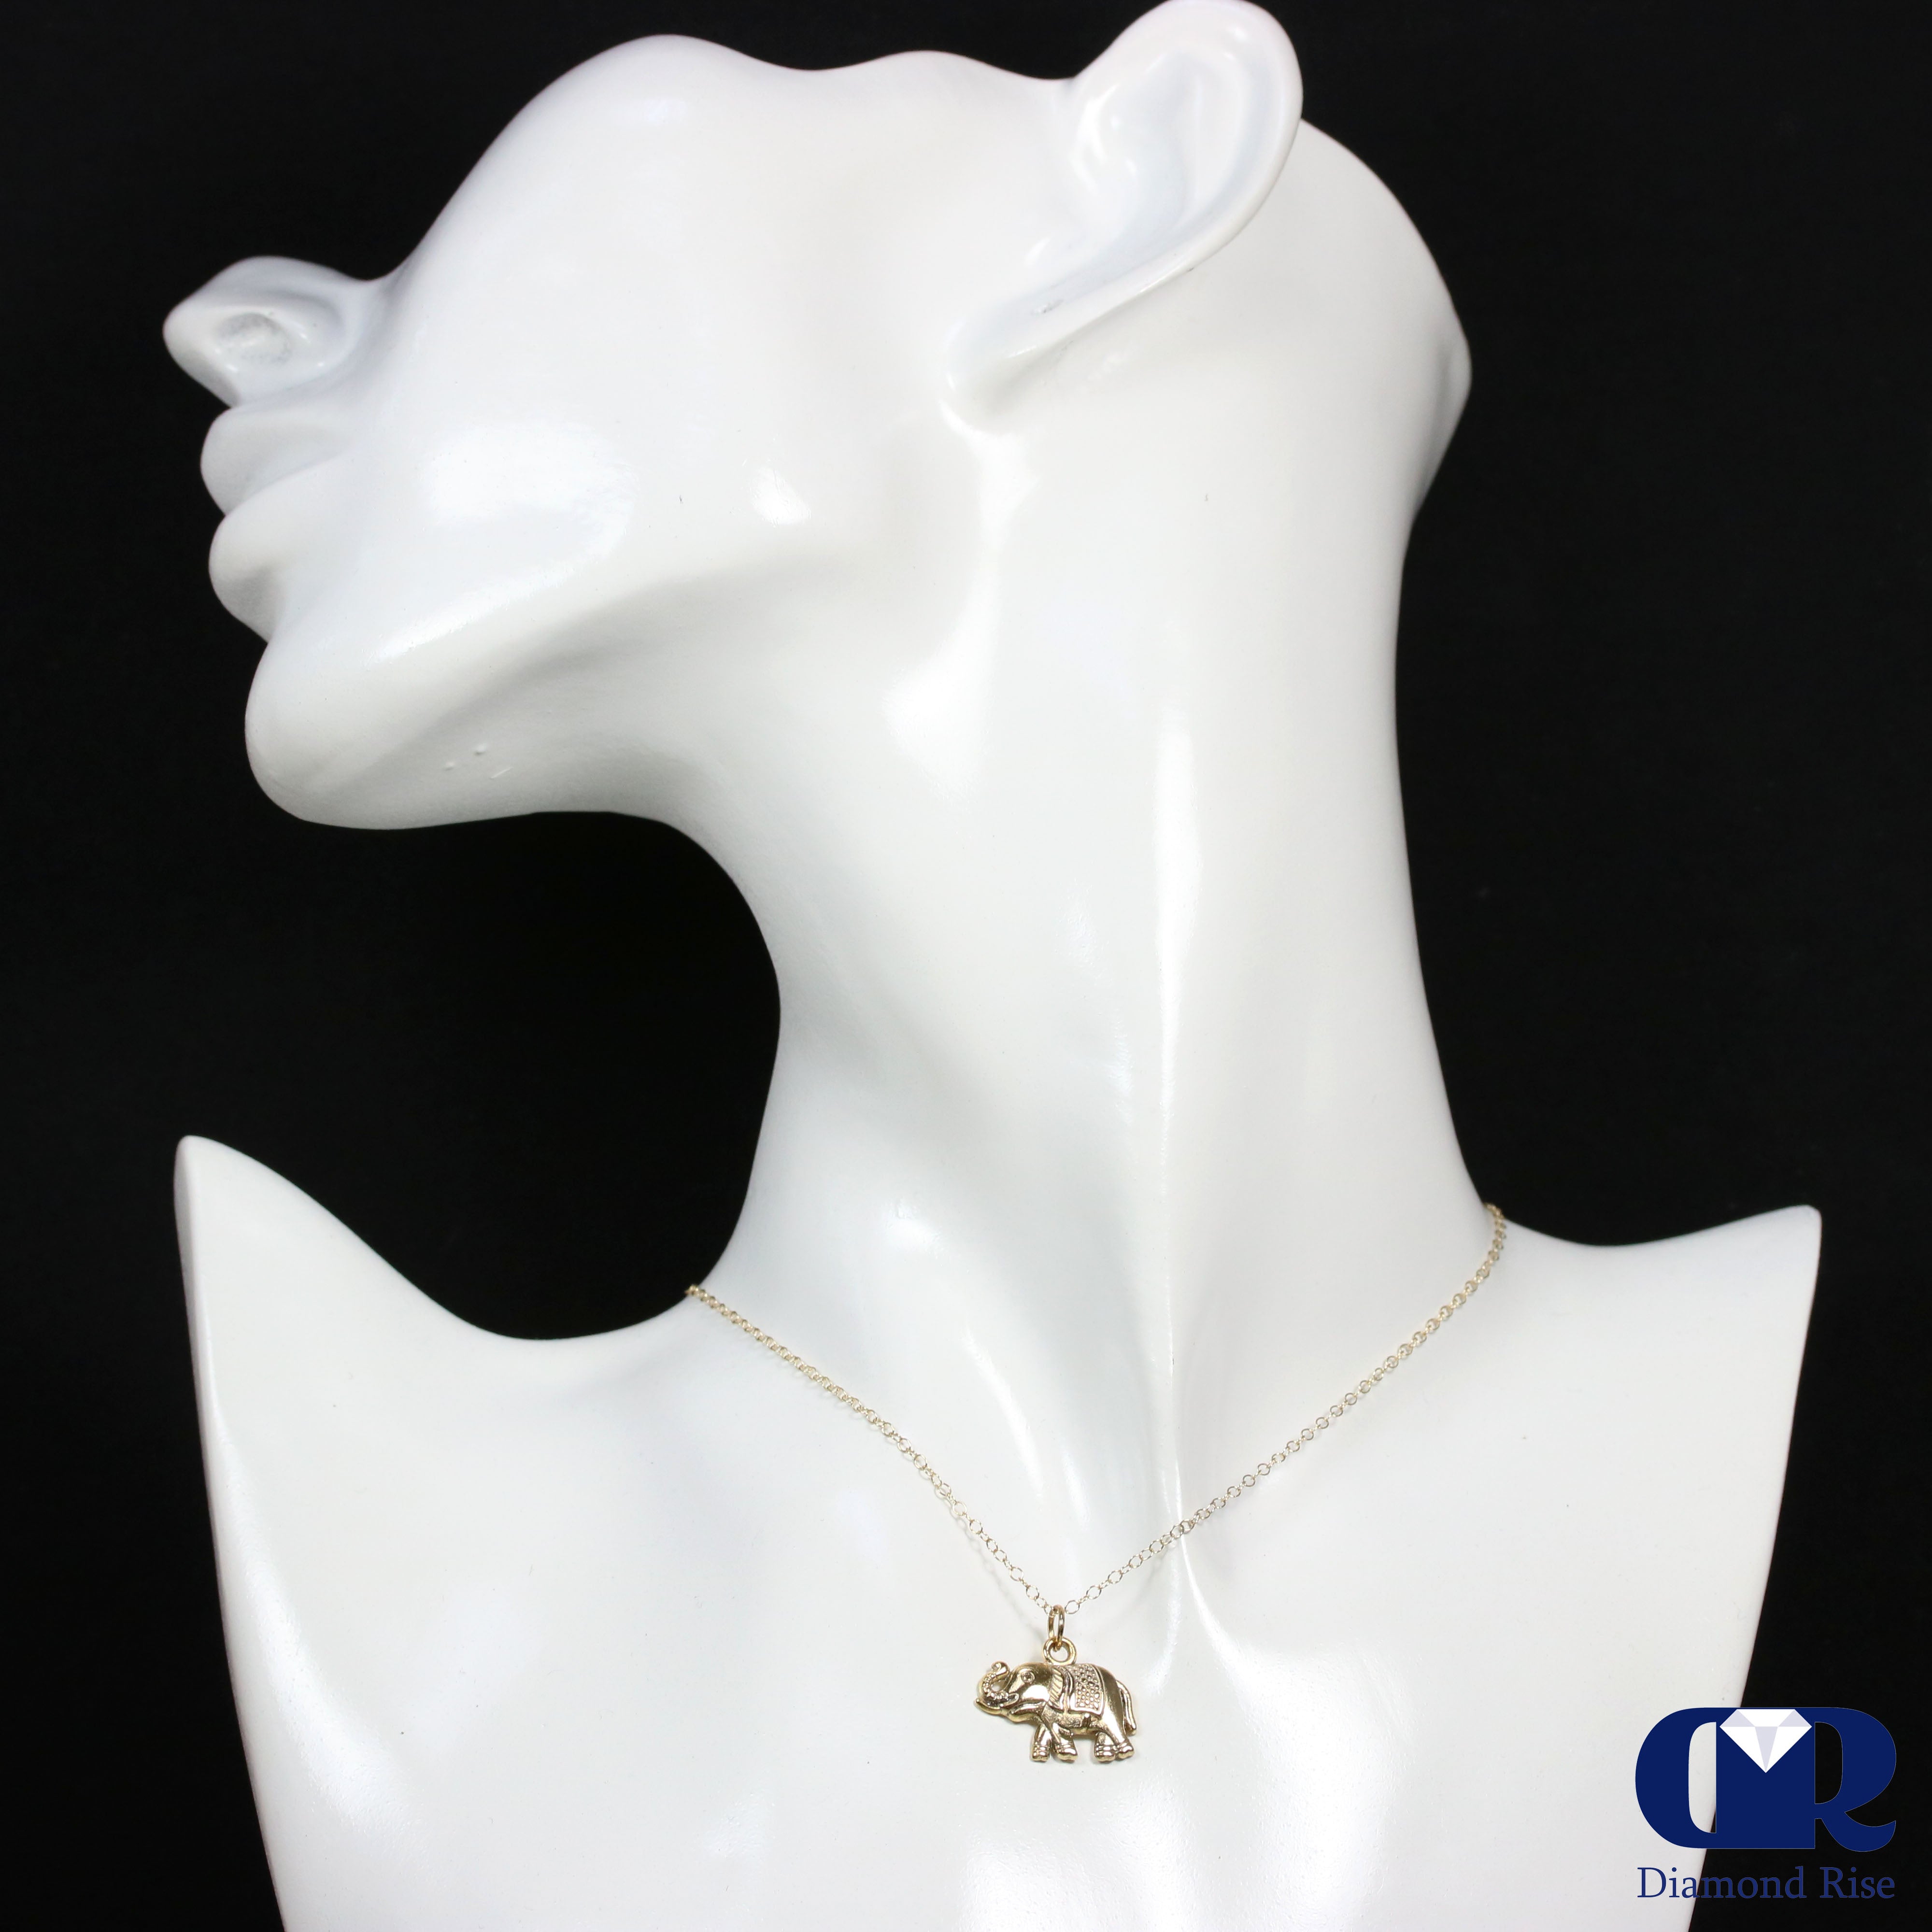 Solid 14K Yellow Gold Elephant Pendant Necklace With 16